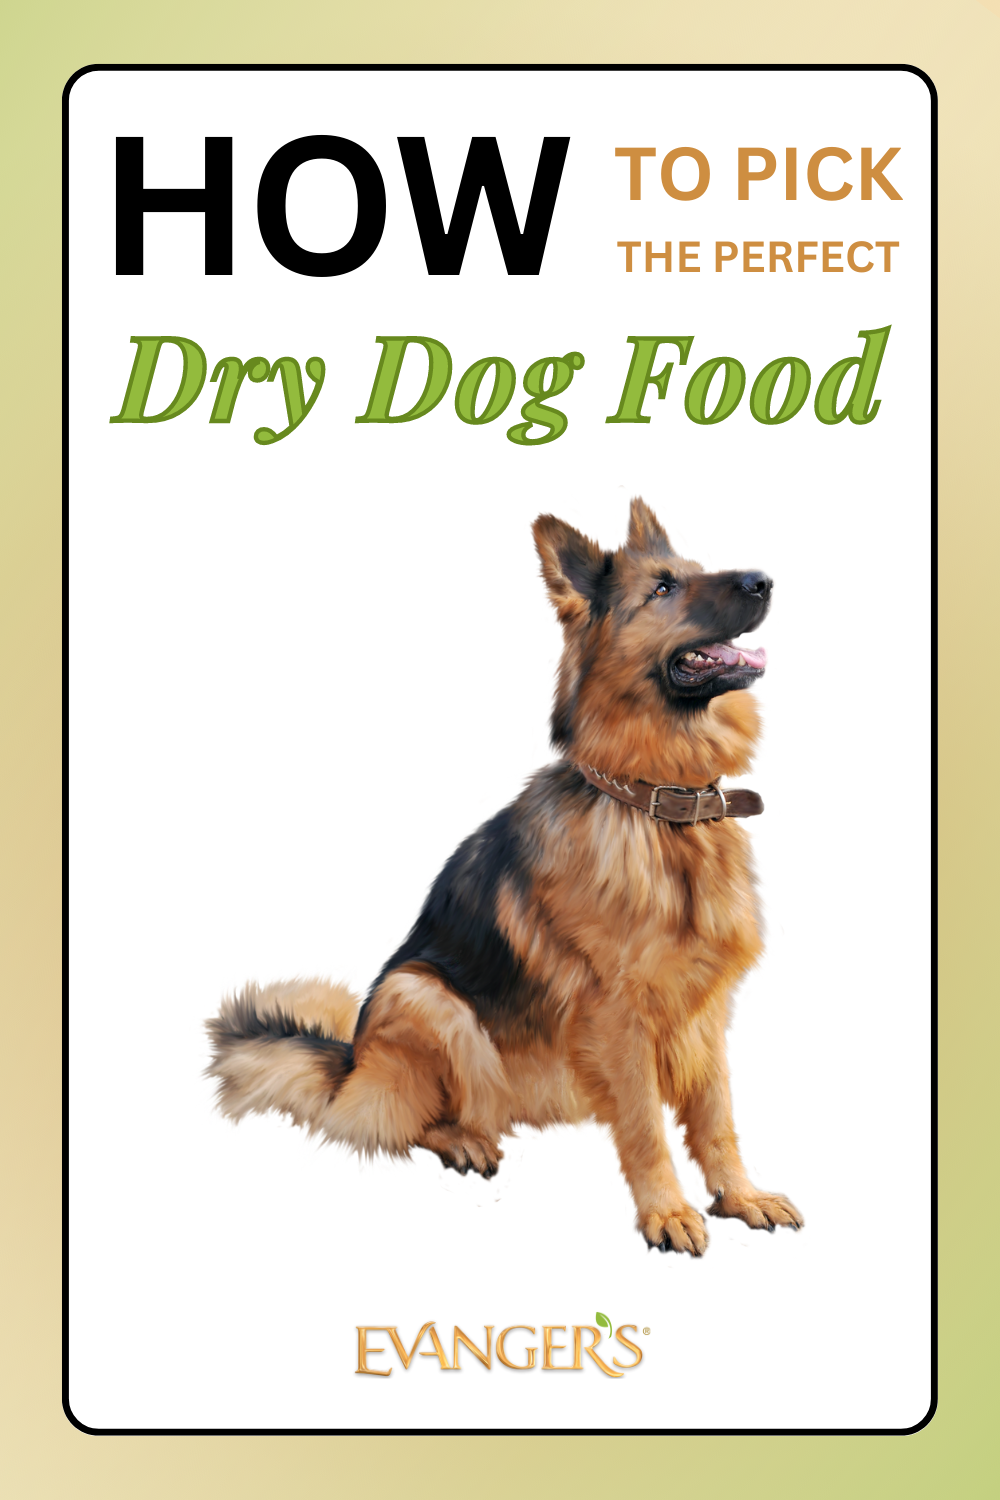 How to Pick the Perfect Dry Food for Your Dog